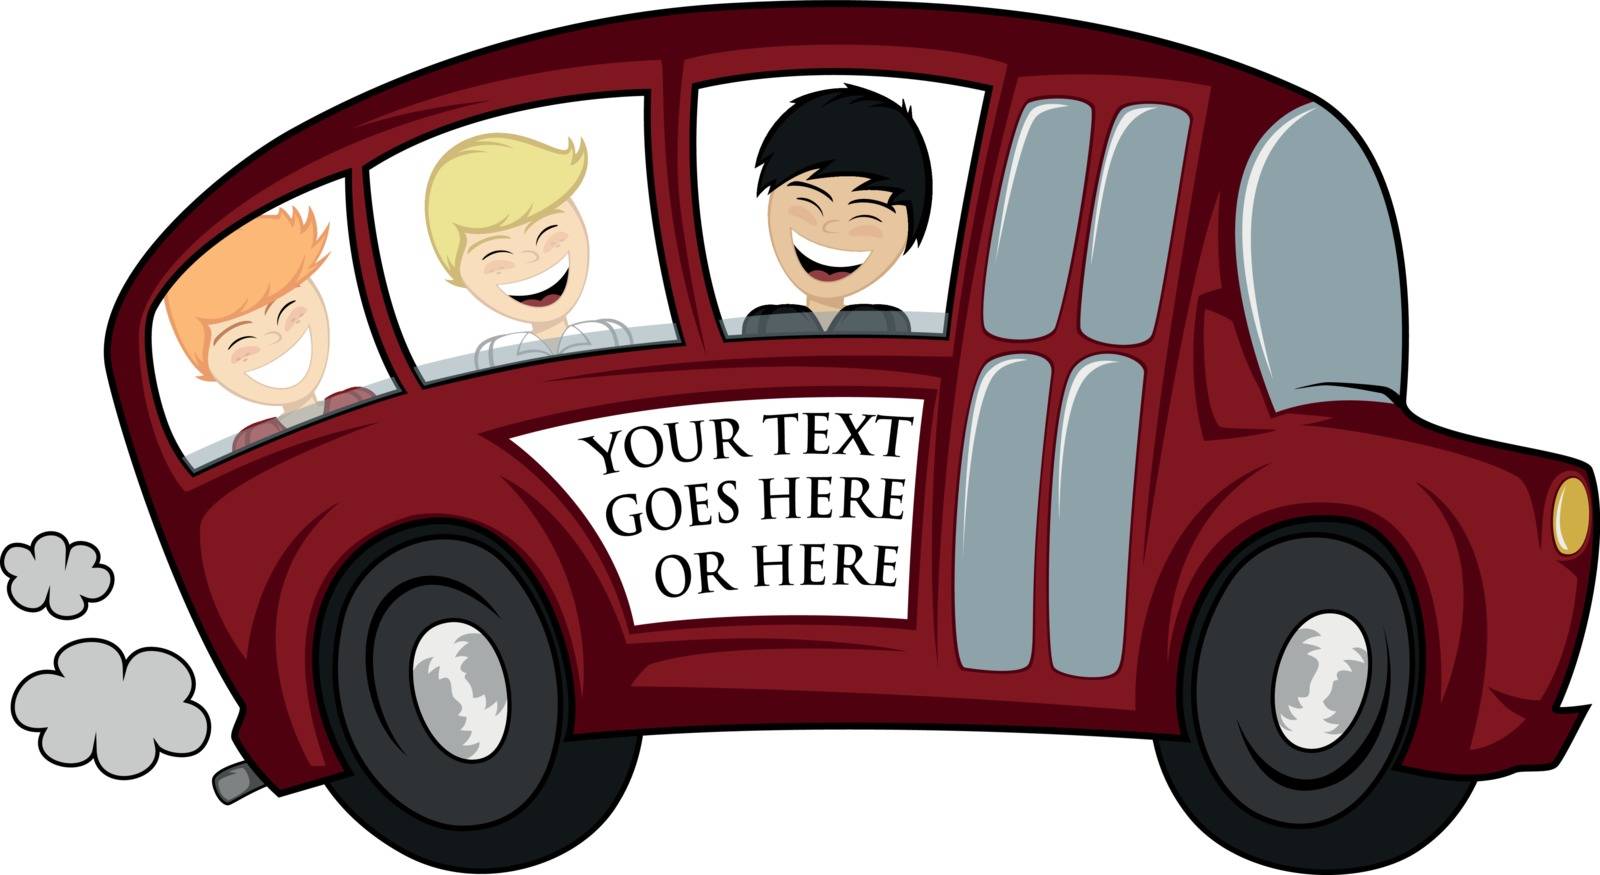 Funny illustration of a (school) bus with children (boys) - you can place any text on